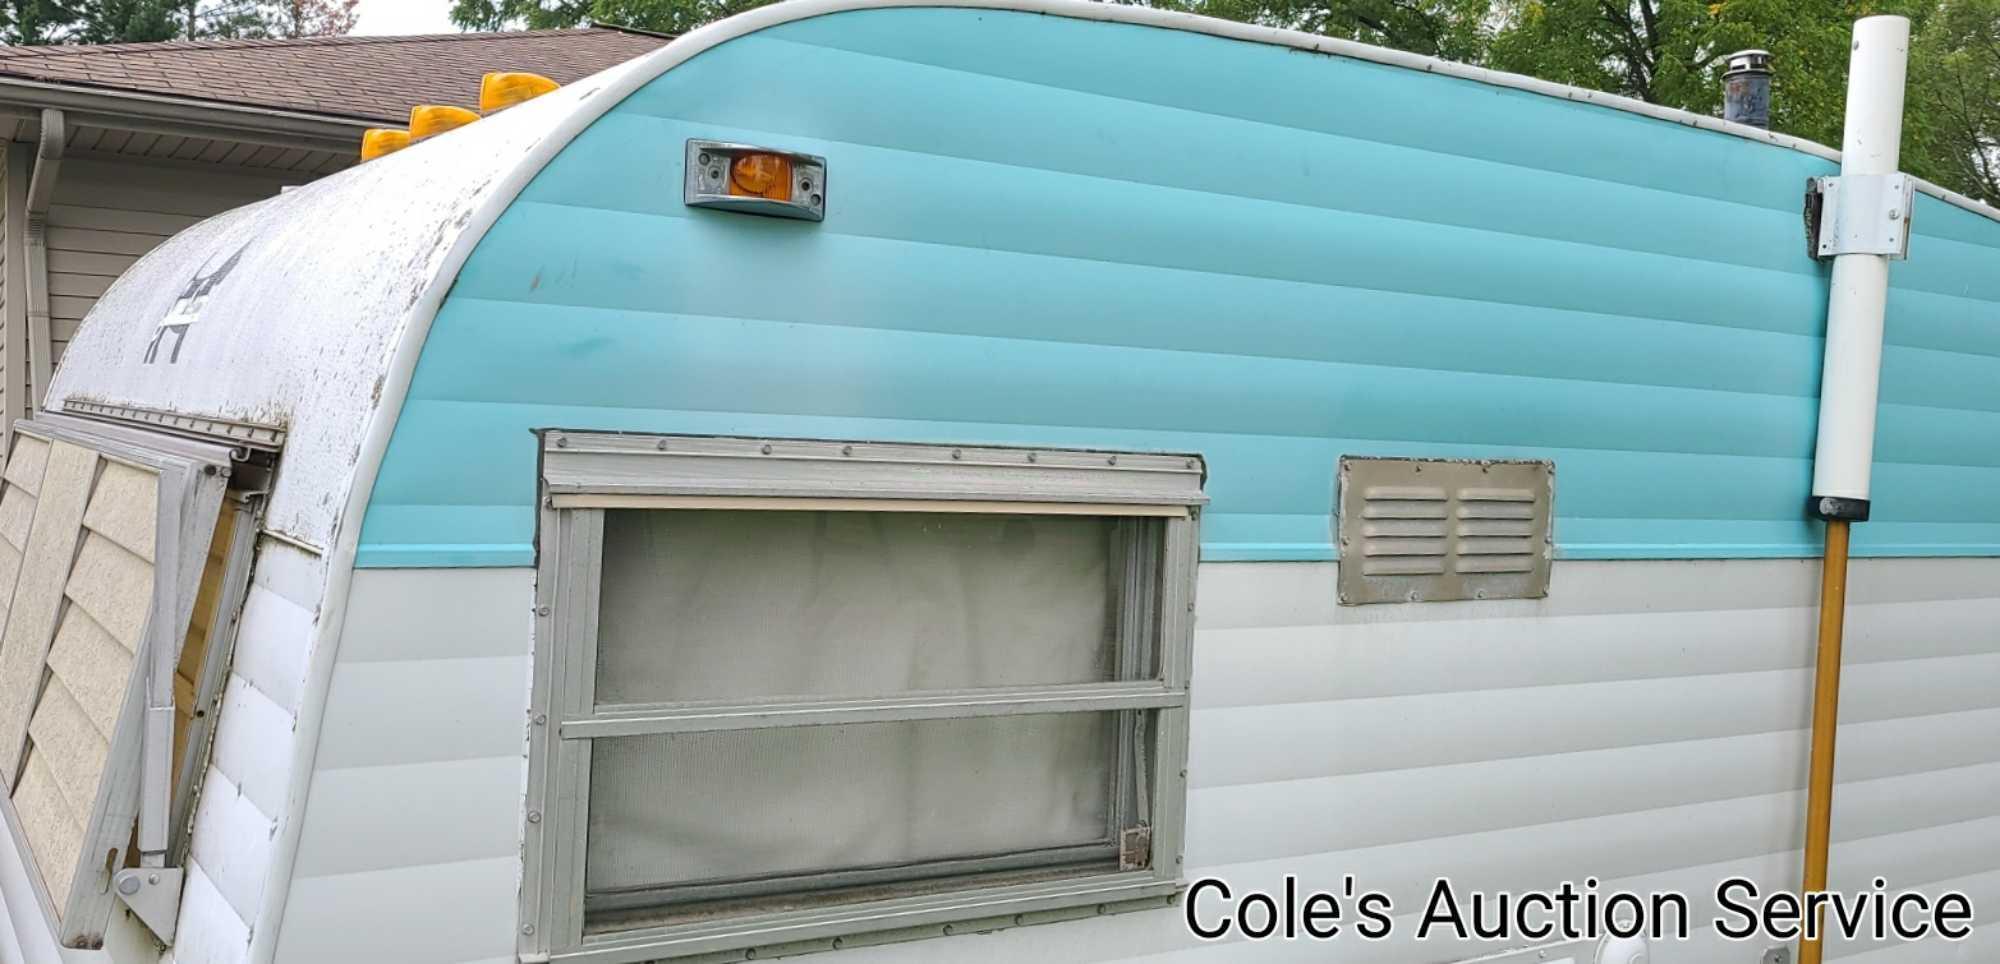 Vintage Serro Scotty Sportsman camper trailer. Take a look at the photos as this vintage camper is